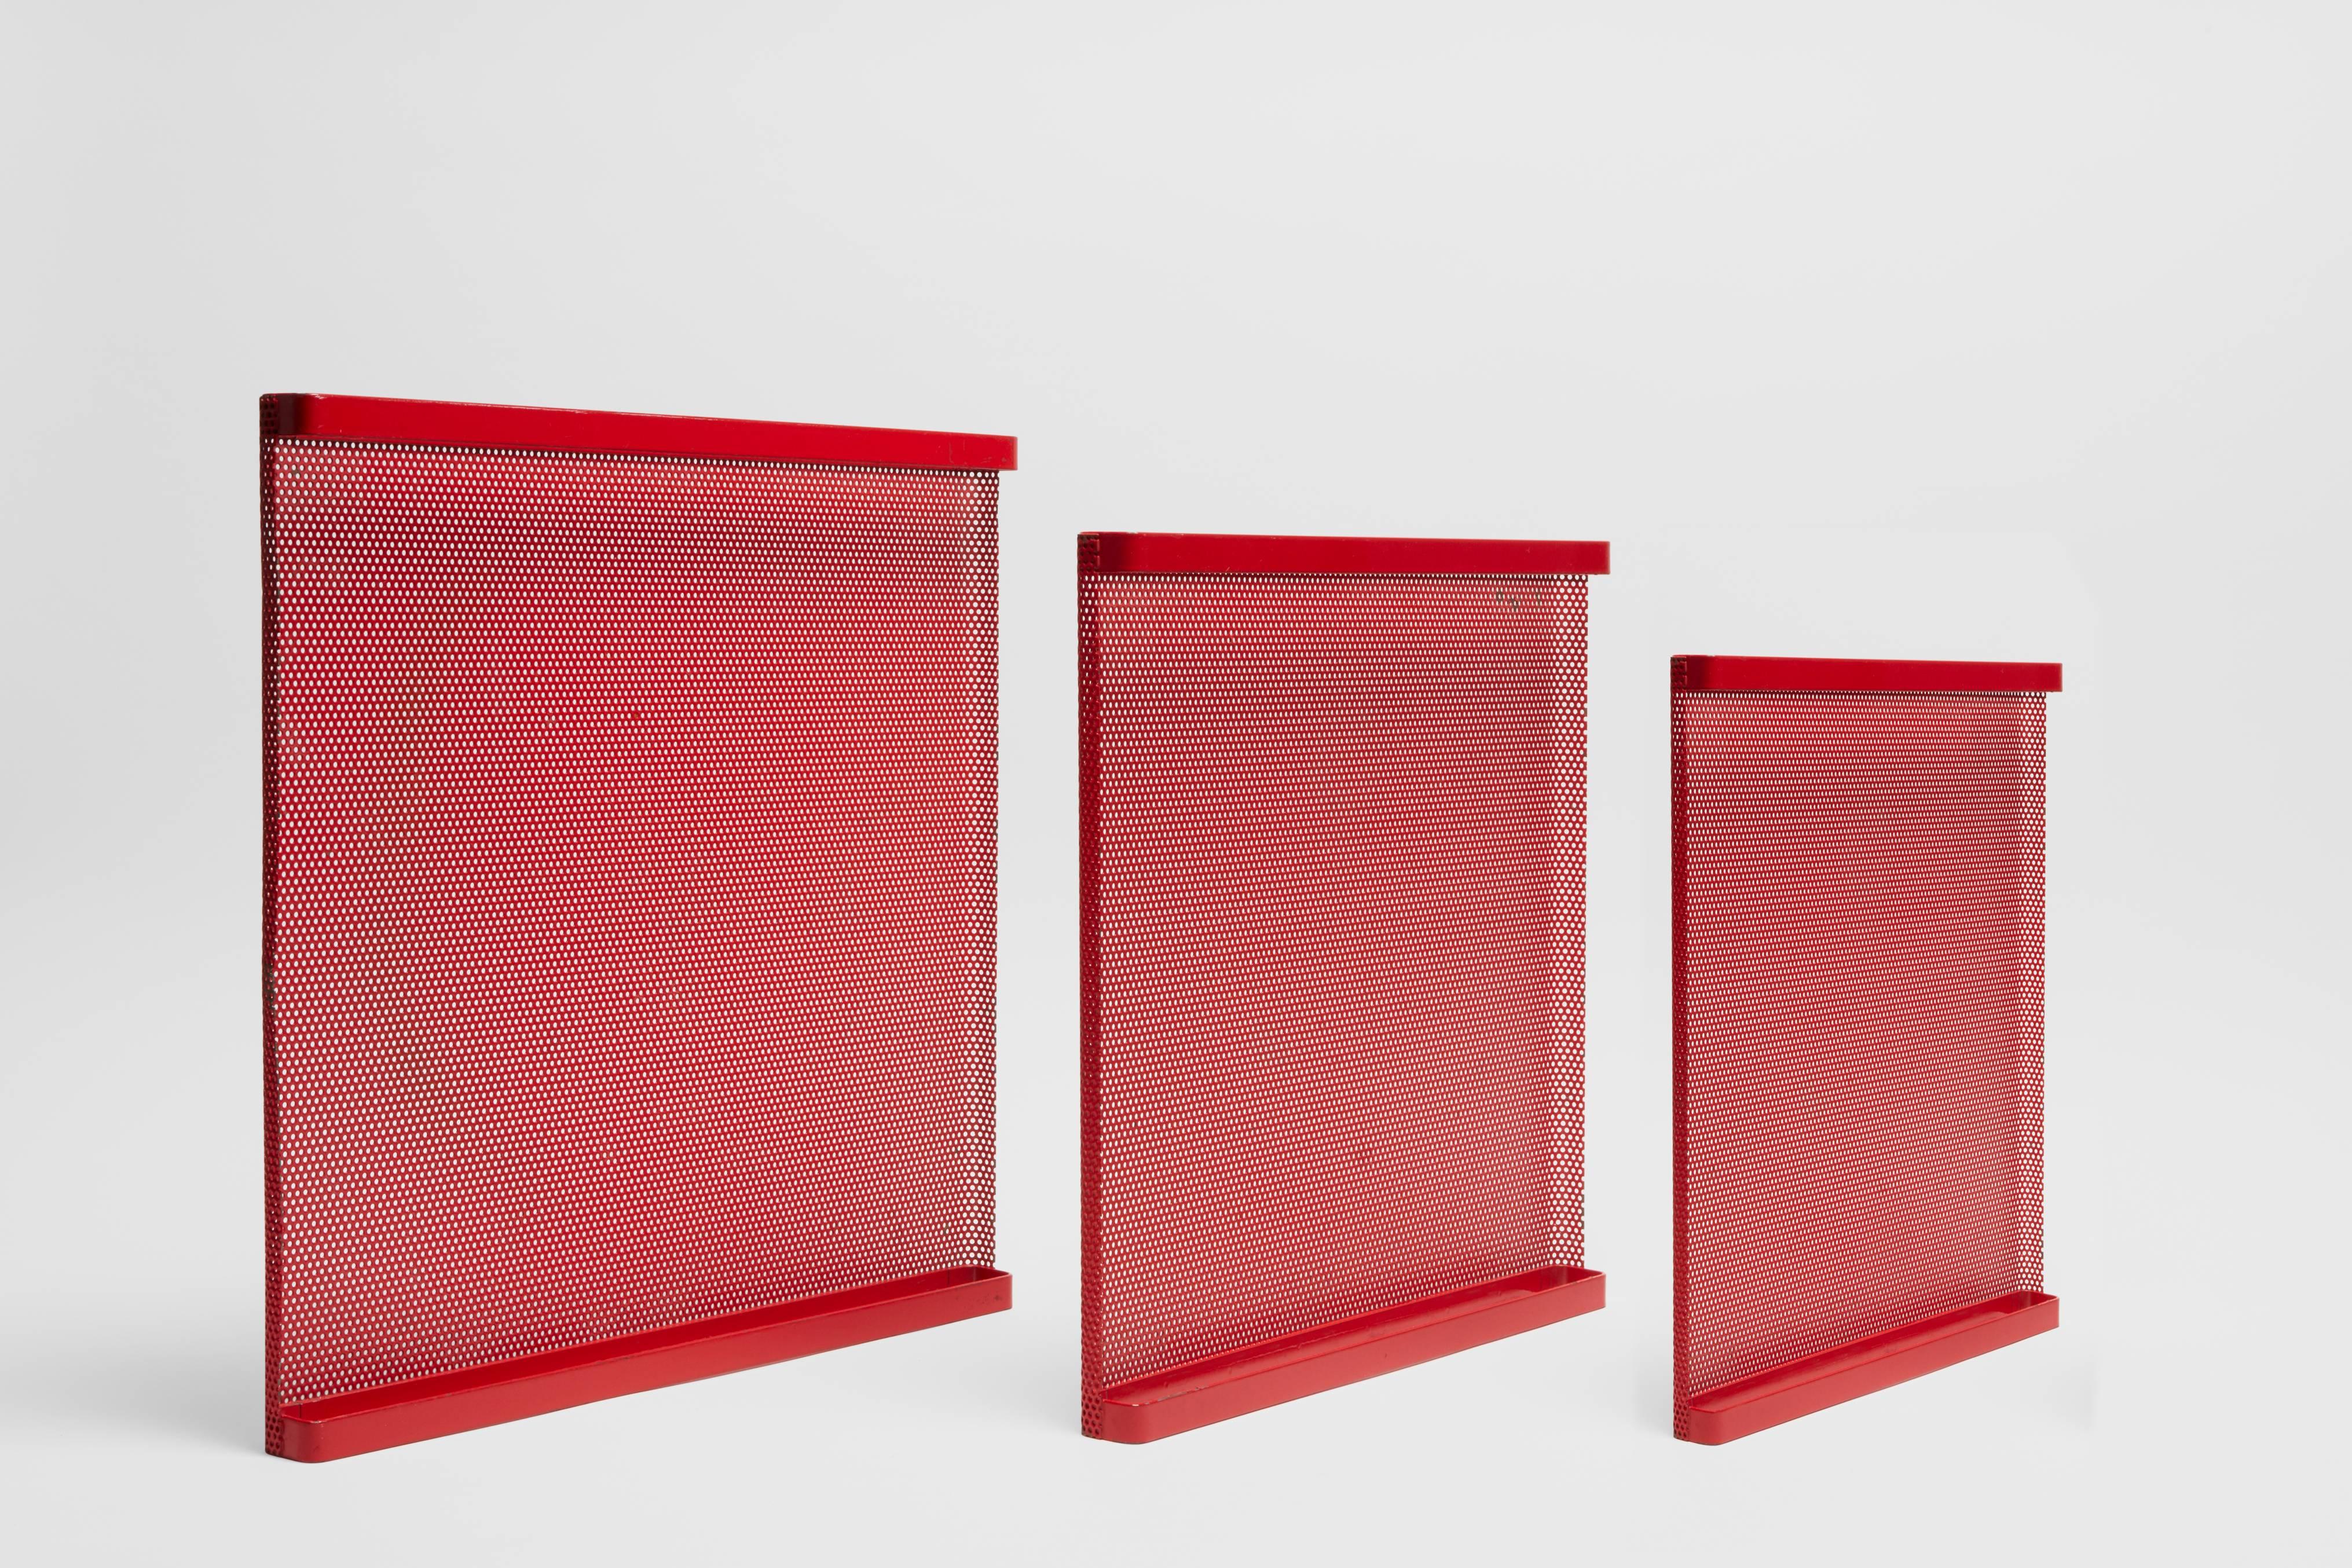 A set of three red perforated metal nesting trays. This set is made by esteemed French designer and artist Mathieu Matégot. These nesting trays are executed in Mategot's preferred medium of steel, which he was famous for using in varied modalities